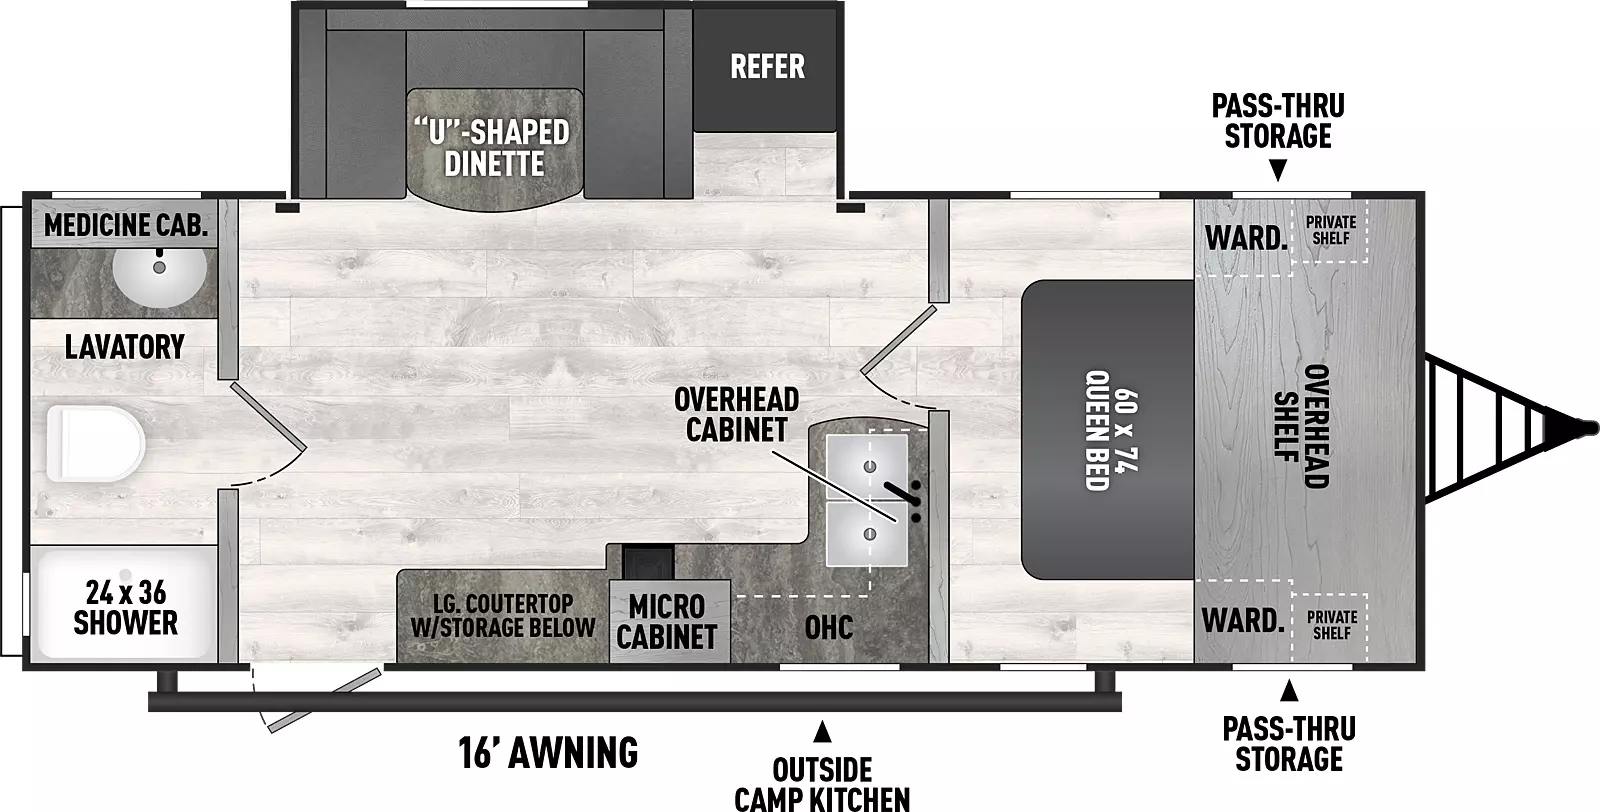 The 251RBS has one slideout and one entry. Exterior features include front pass through storage, outside camp kitchen, and 16 foot awning. Interior layout front to back: queen bed with overhead shelf and wardrobe with shelf on each side; off-door side slideout with refrigerator and u-shaped dinette; kitchen counter wraps along inner wall to door side with sink and cooktop, overhead cabinet, microwave, more countertop space with storage below, and entry; rear full bathroom with medicine cabinet.